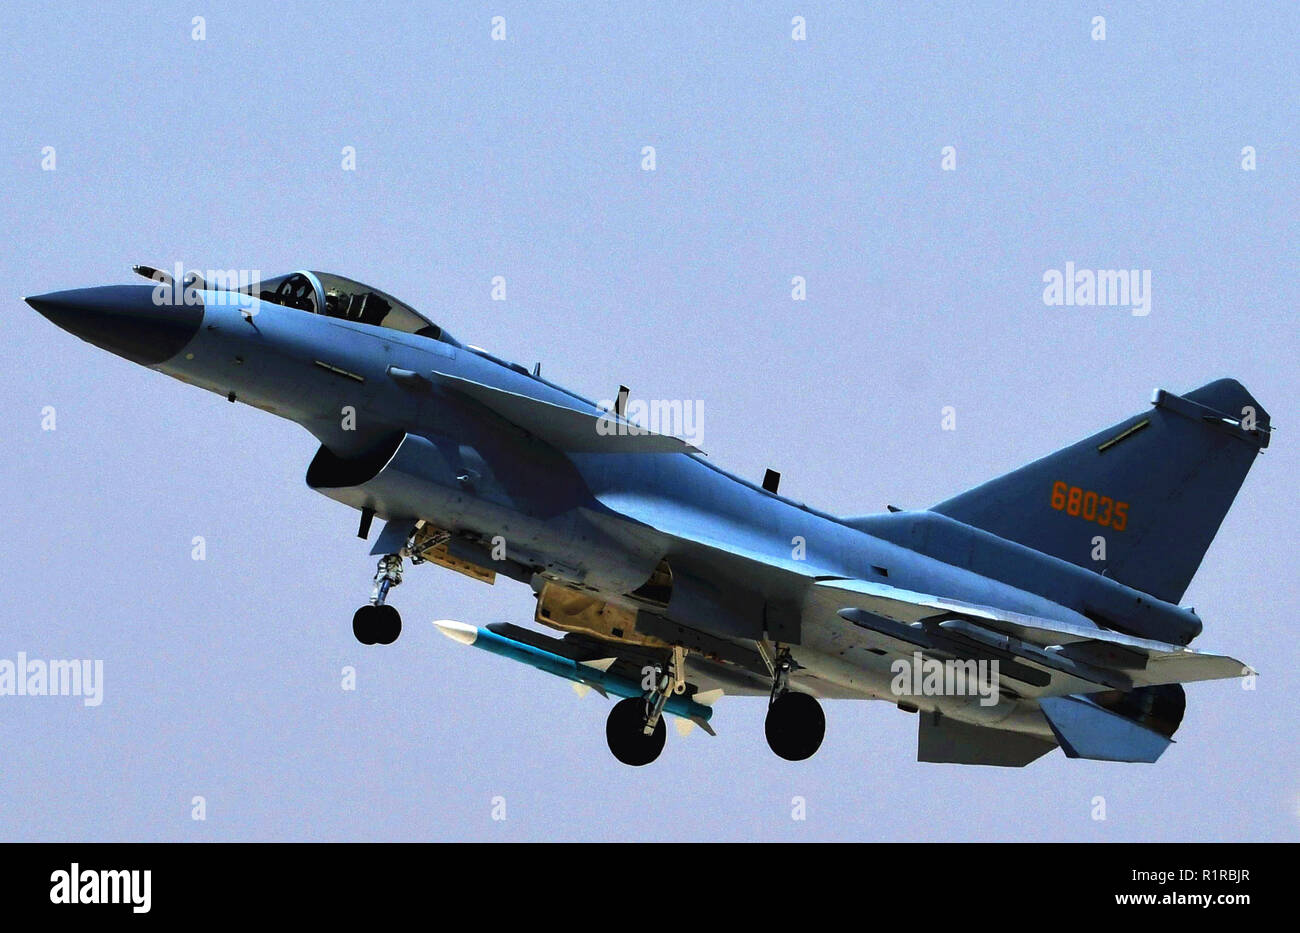 (181114) -- BEIJING, Nov. 14, 2018 (Xinhua) -- Photo taken on April 12, 2018 shows a J-10C fighter jet in a training. The Chinese Air Force announced a roadmap for building a stronger modern air force in three steps. The building of a stronger modern air force is in line with the overall goal of building national defense and the armed forces, Lieutenant General Xu Anxiang, deputy commander of Chinese Air Force, said at a press conference on celebrating the 69th anniversary of the establishment of Chinese Air Force held in Zhuhai, south China's Guangdong Province, Nov. 11, 2018. (Xinhua/Liu Chu Stock Photo